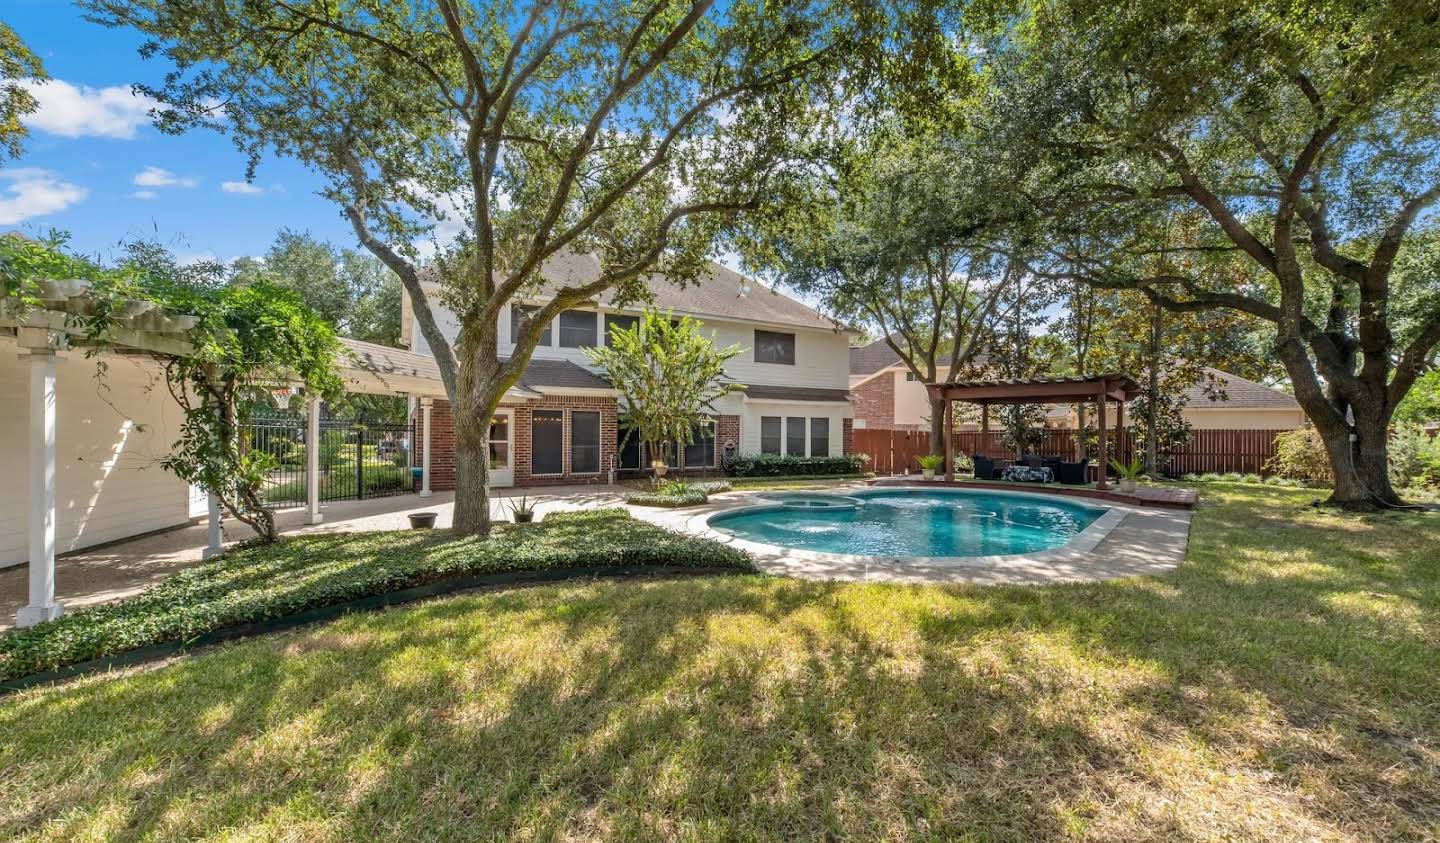 House with pool Cypress